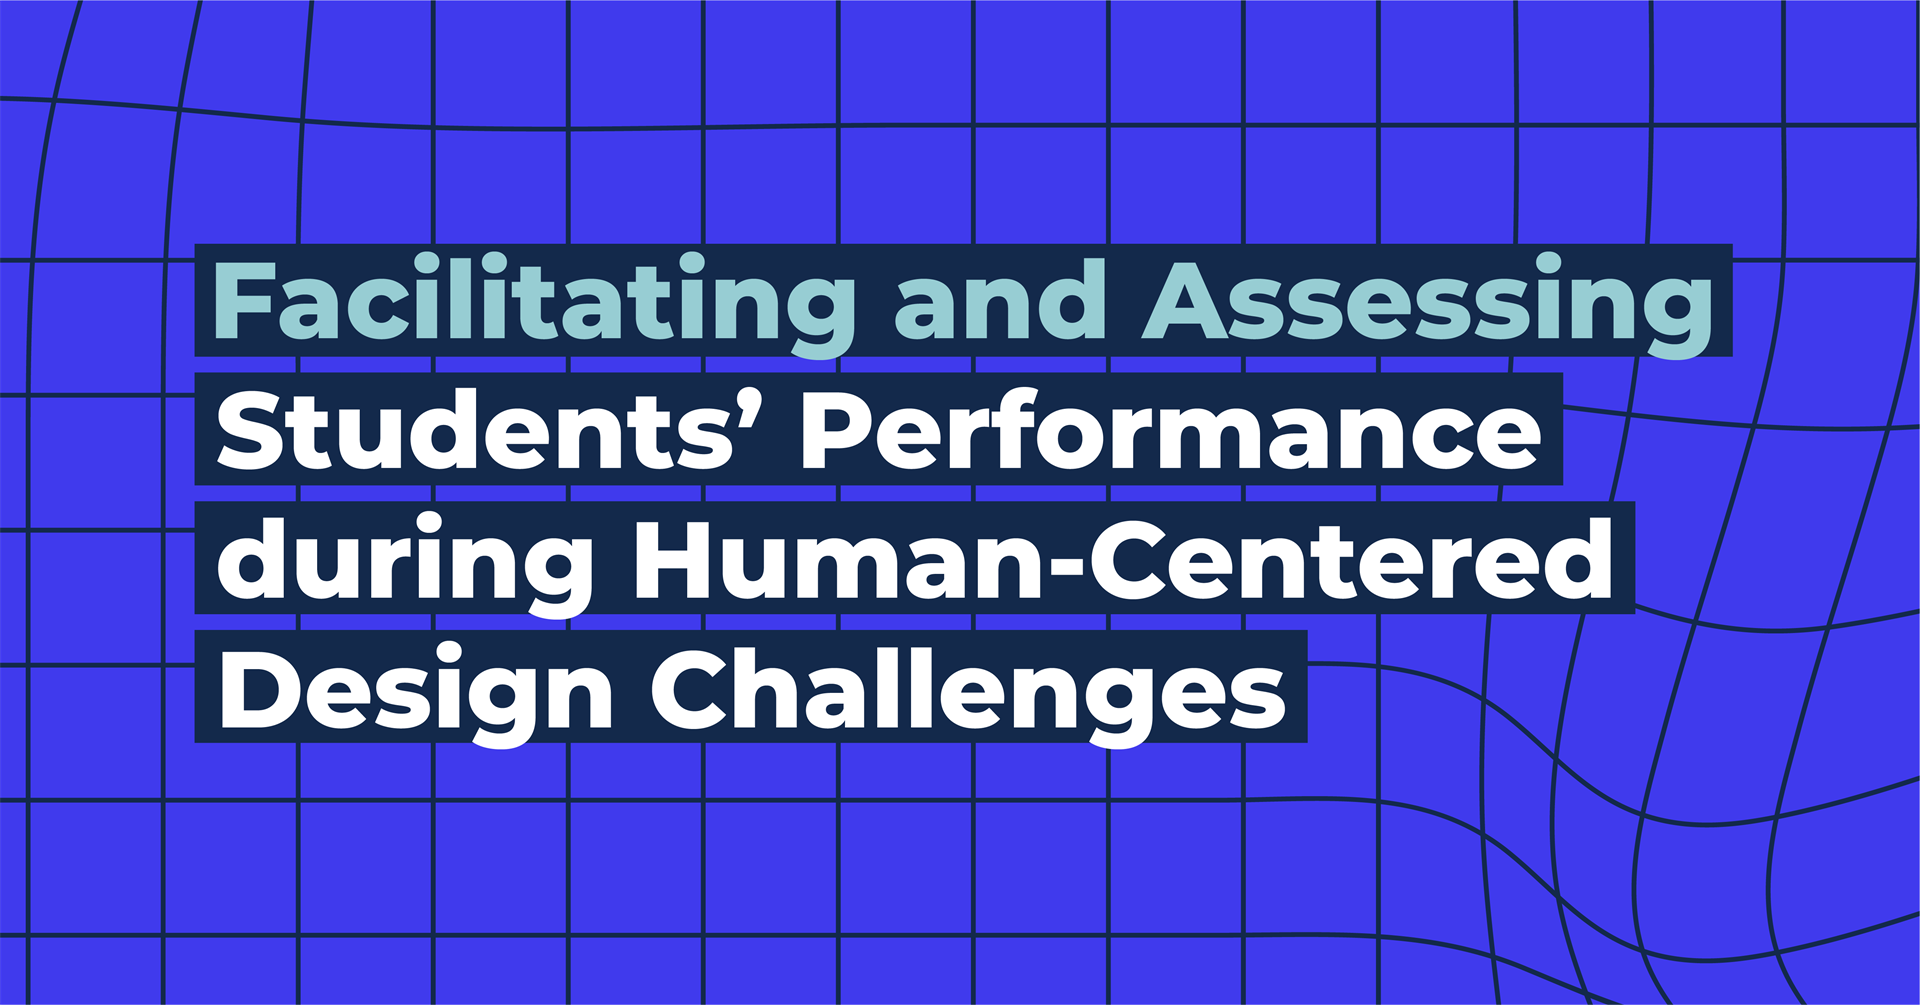 Facilitating and Assessing Students' Performance during Human-Centered Design Challenges